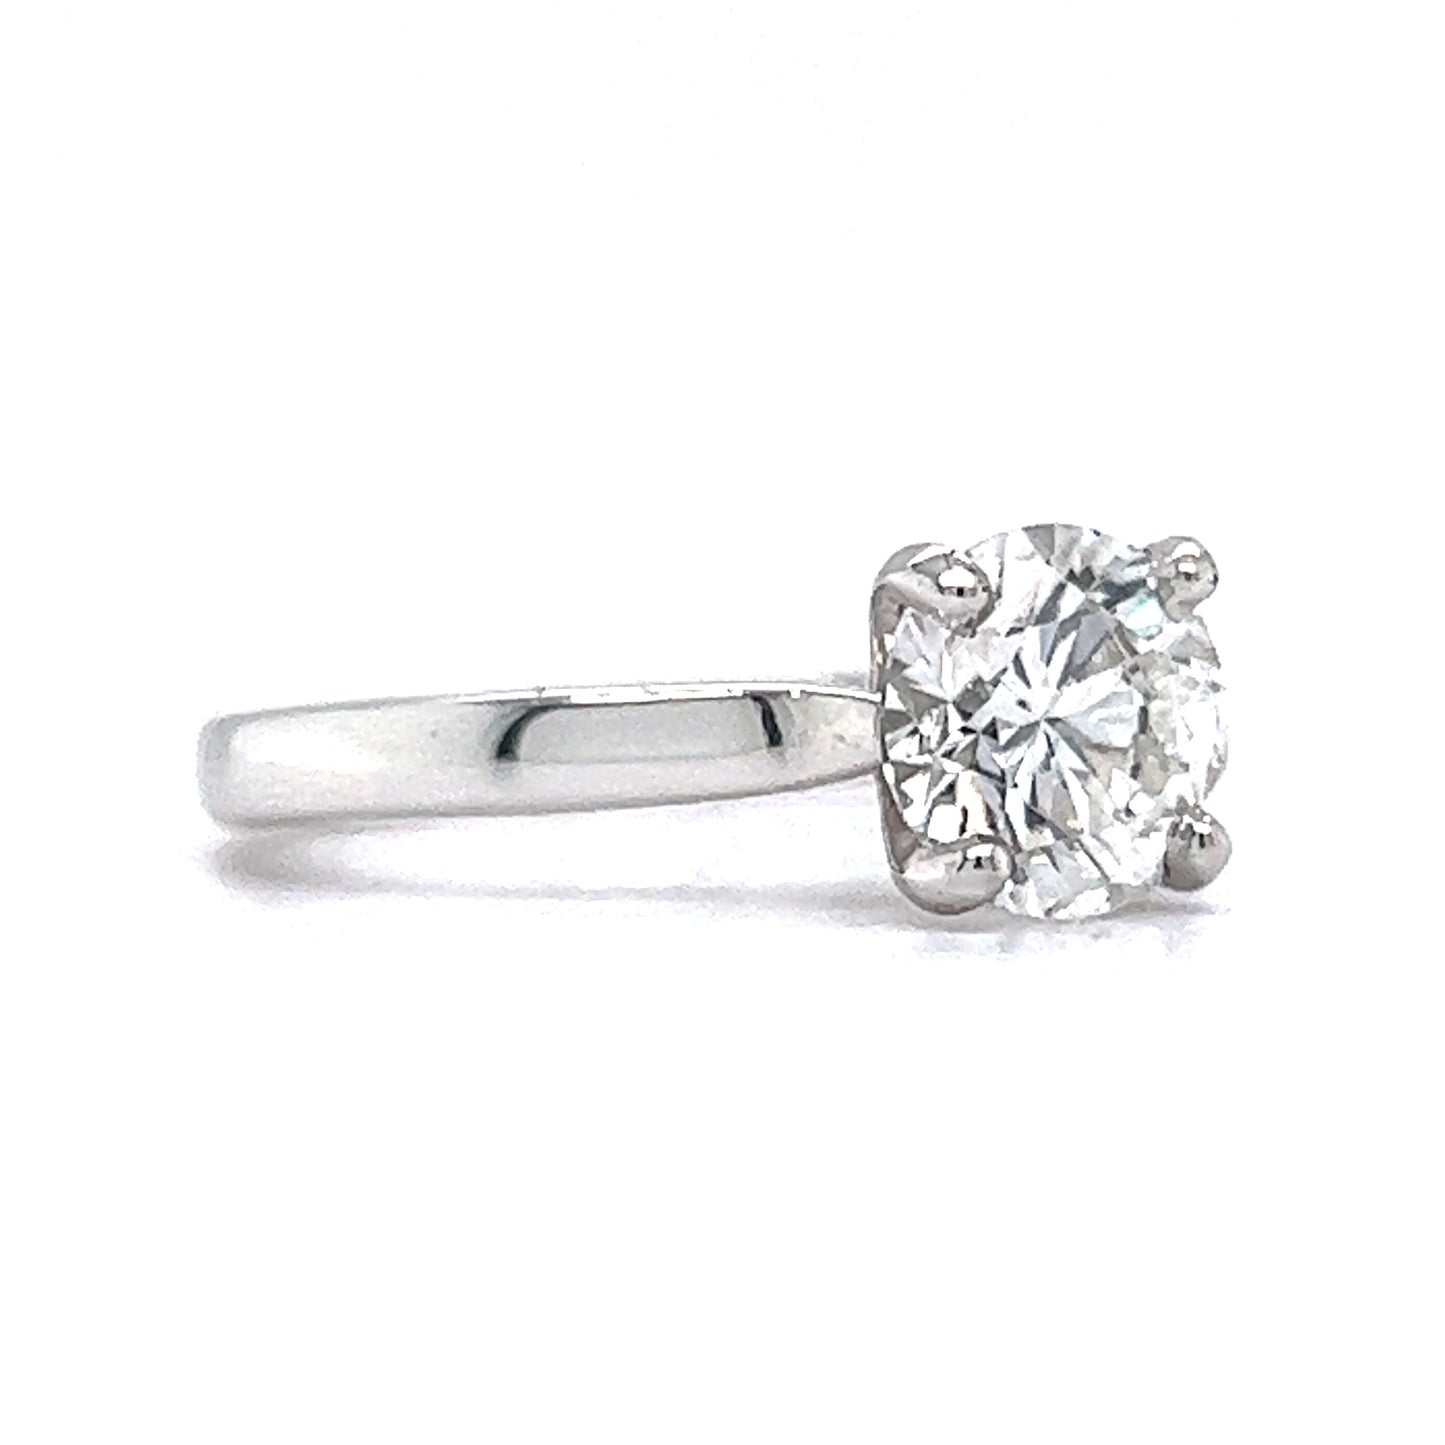 1.51 GIA Diamond Solitaire Engagement Ring in 14k White Gold